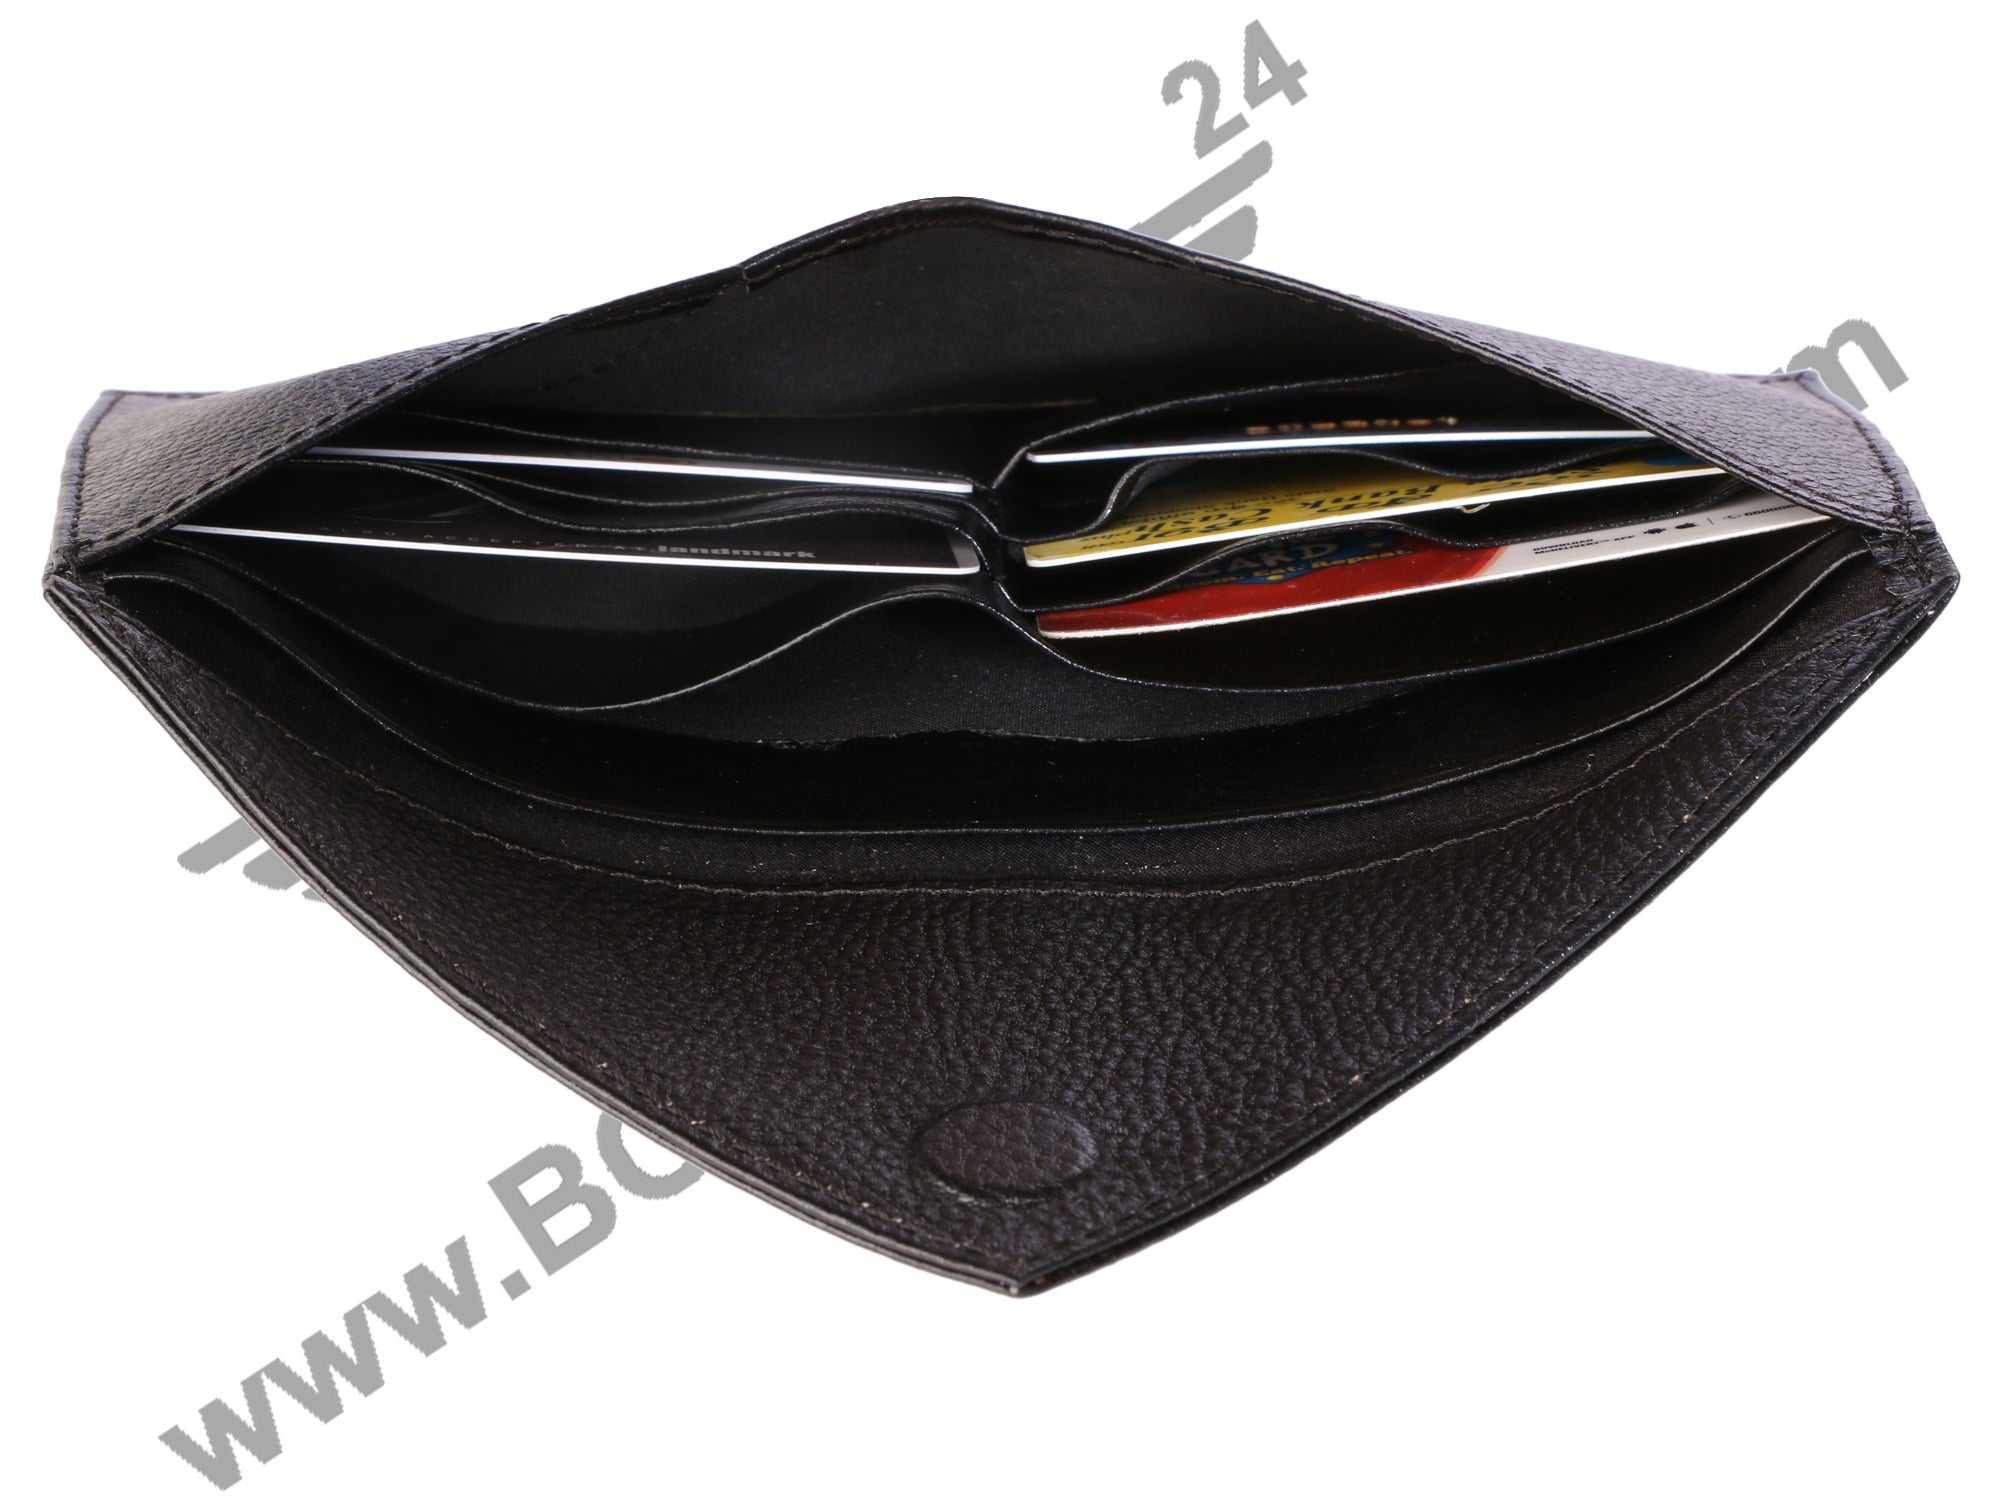 Inside view of a women's envelope wallet. It can easily accomodate credit cards, currency notes, coins and mobile phones